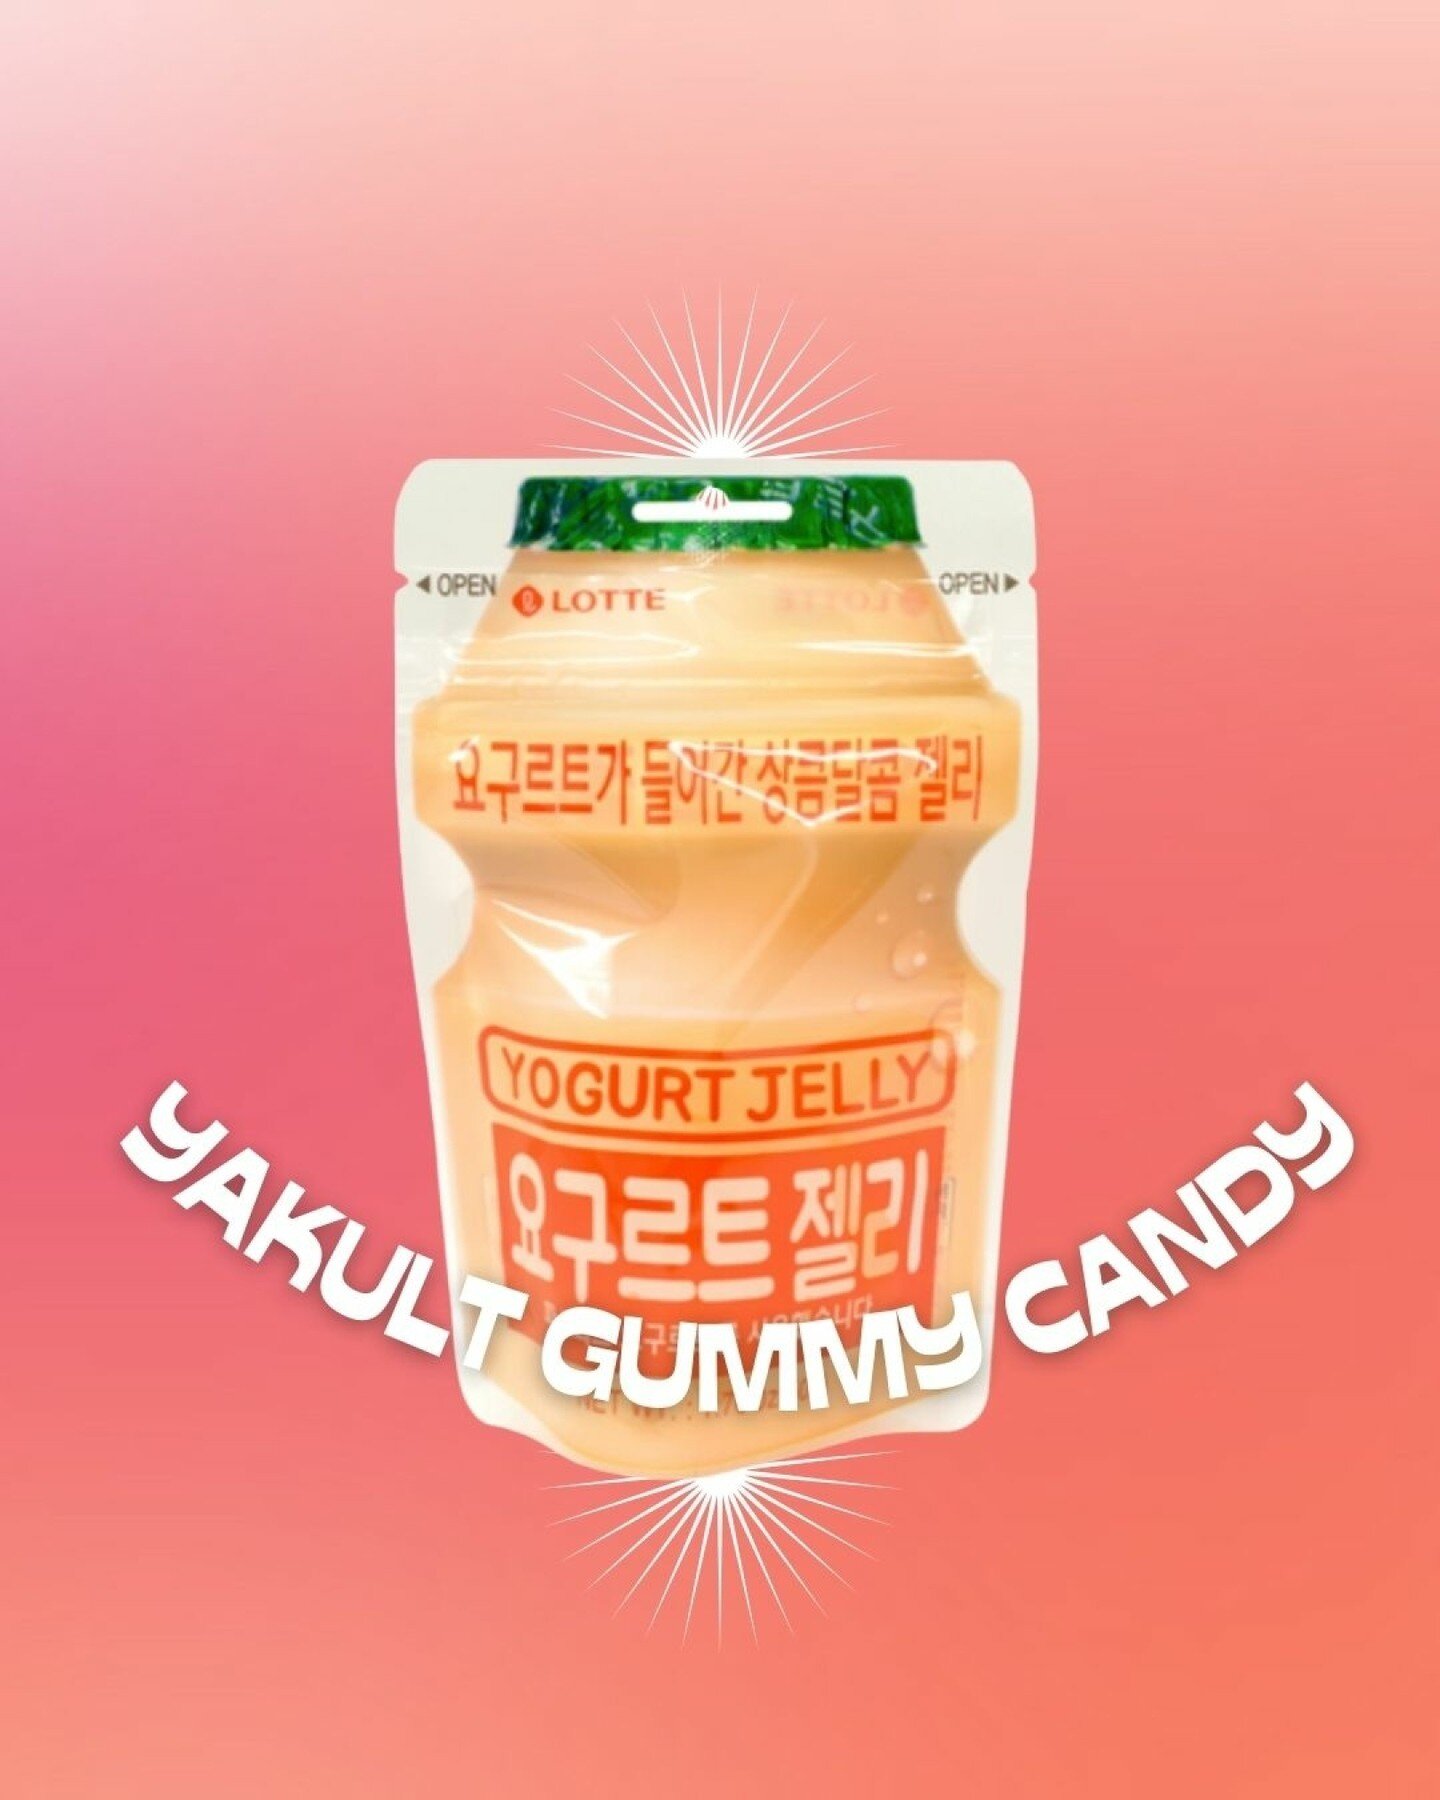 Who remembers drinking Yakult as a kid? 🙋&zwj;♀️🙋&zwj;♂️ We're excited to introduce Yakult gummy candies - the perfect treat for those who can't get enough of that tangy and sweet nostalgia.

These gummies are made with real Yakult, giving them the